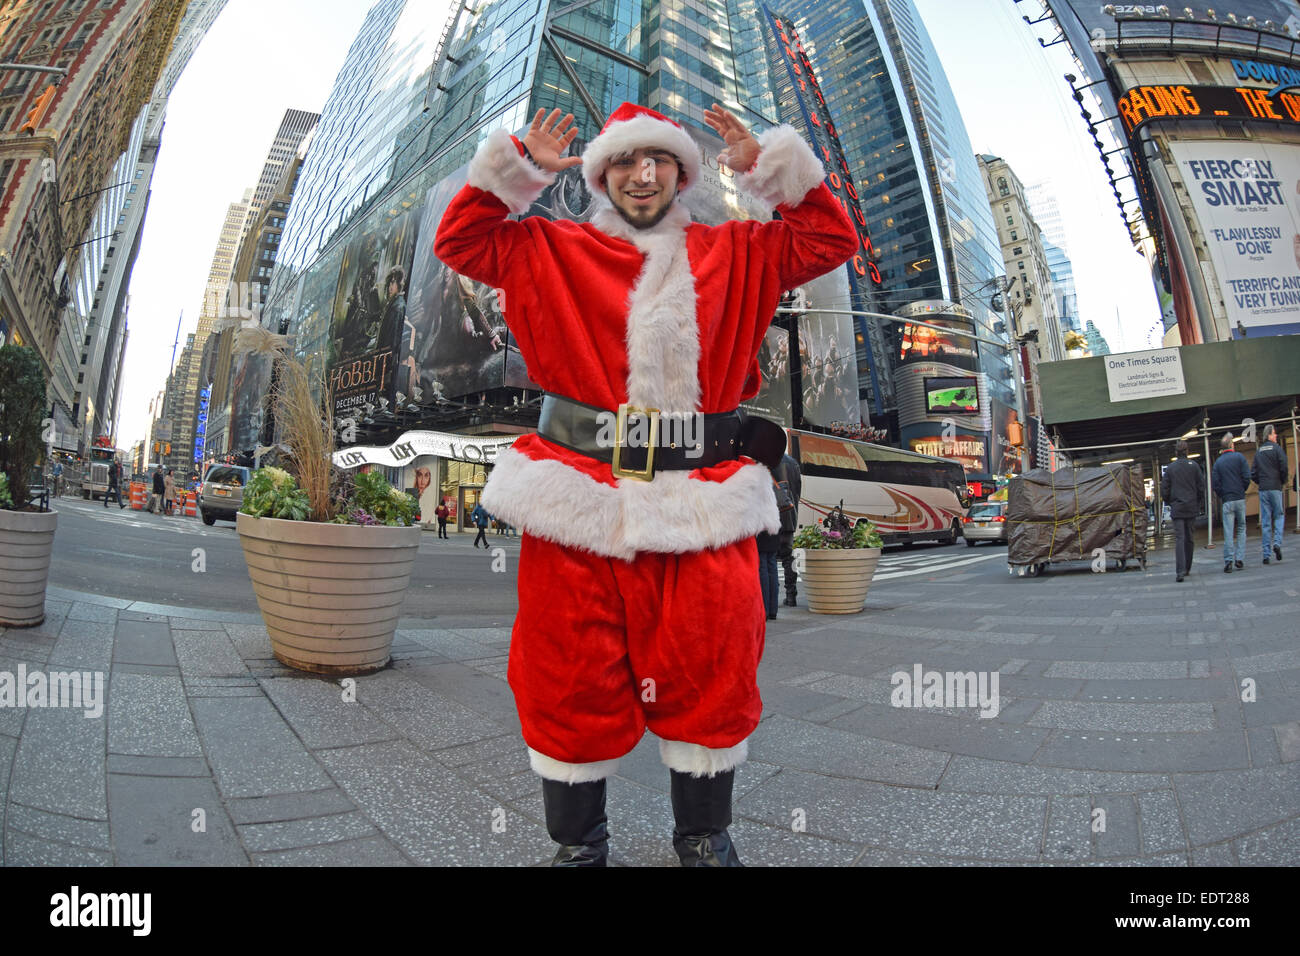 A young man dressed as Santa Claus in Times Square, Midtown Manhattan. New York City Stock Photo